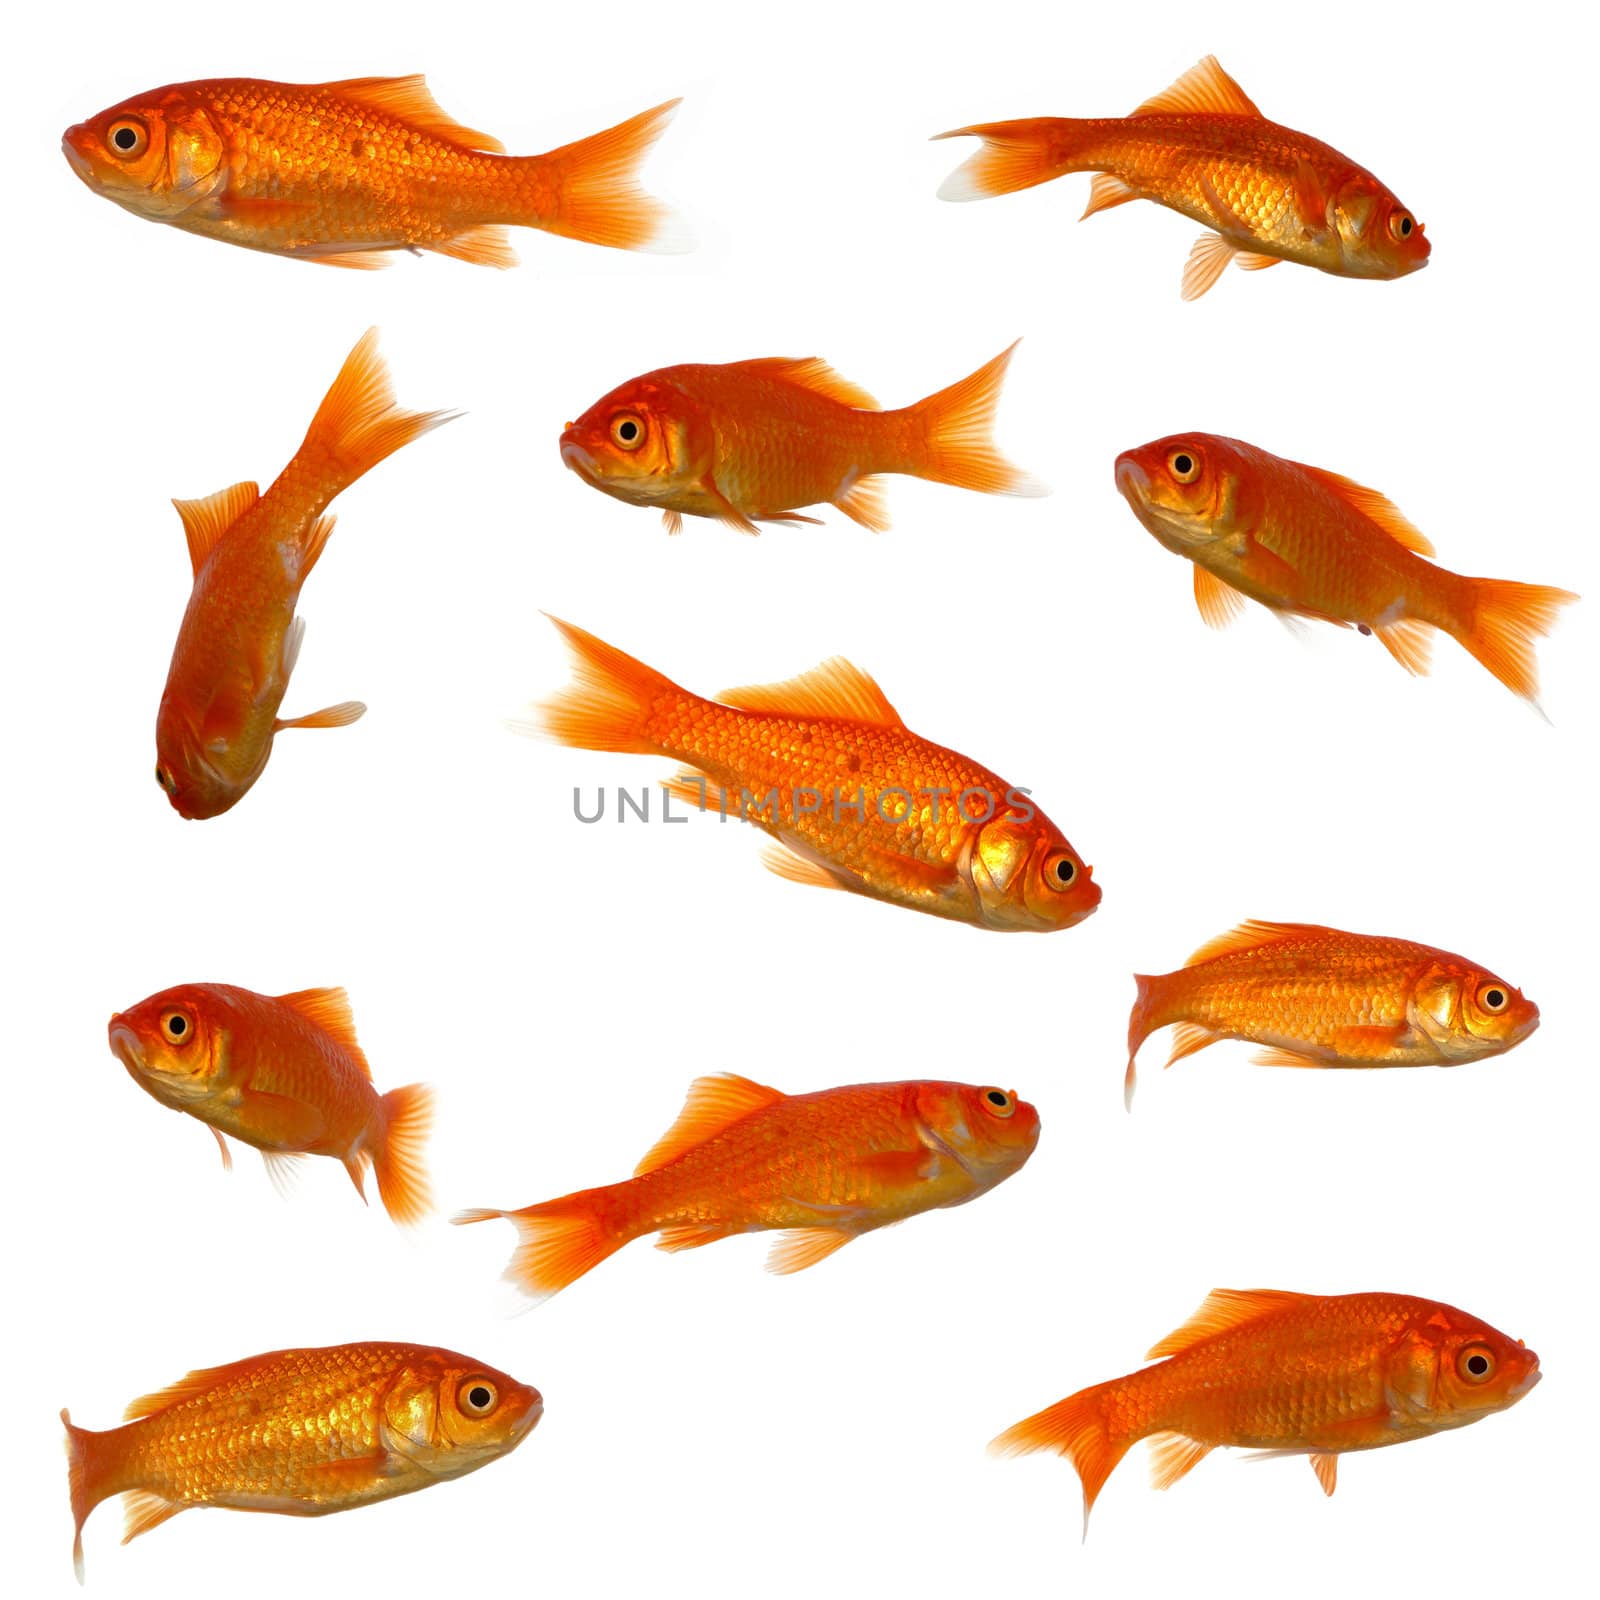 Collection of goldfish. High resolution 4000 x 4000 pixels. On clean white background.